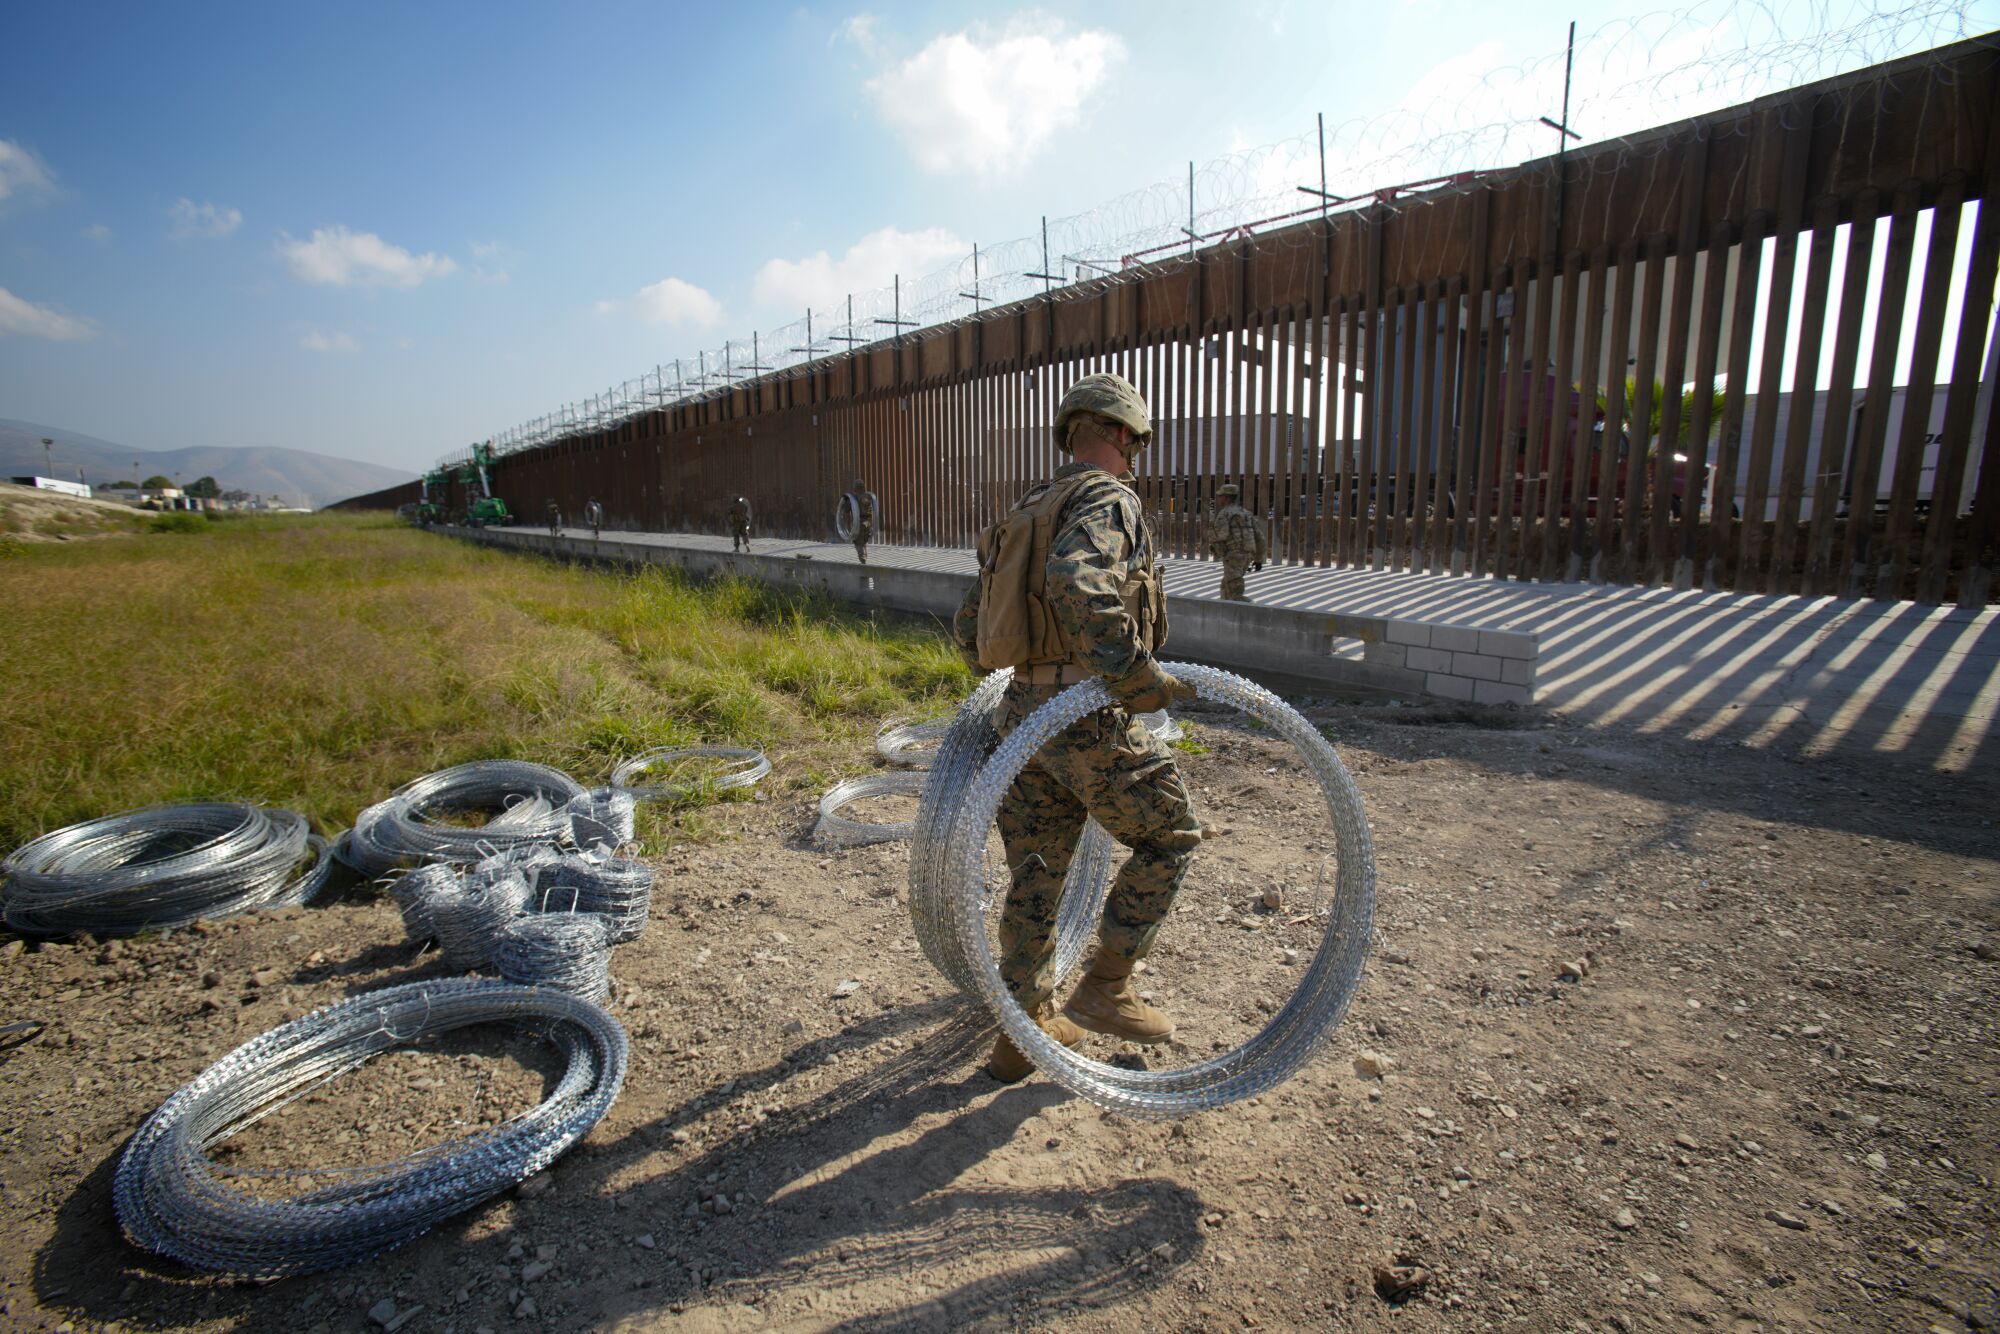 A U.S. military service member carries concertina wire by the barrier at the U.S.-Mexico border in San Diego 